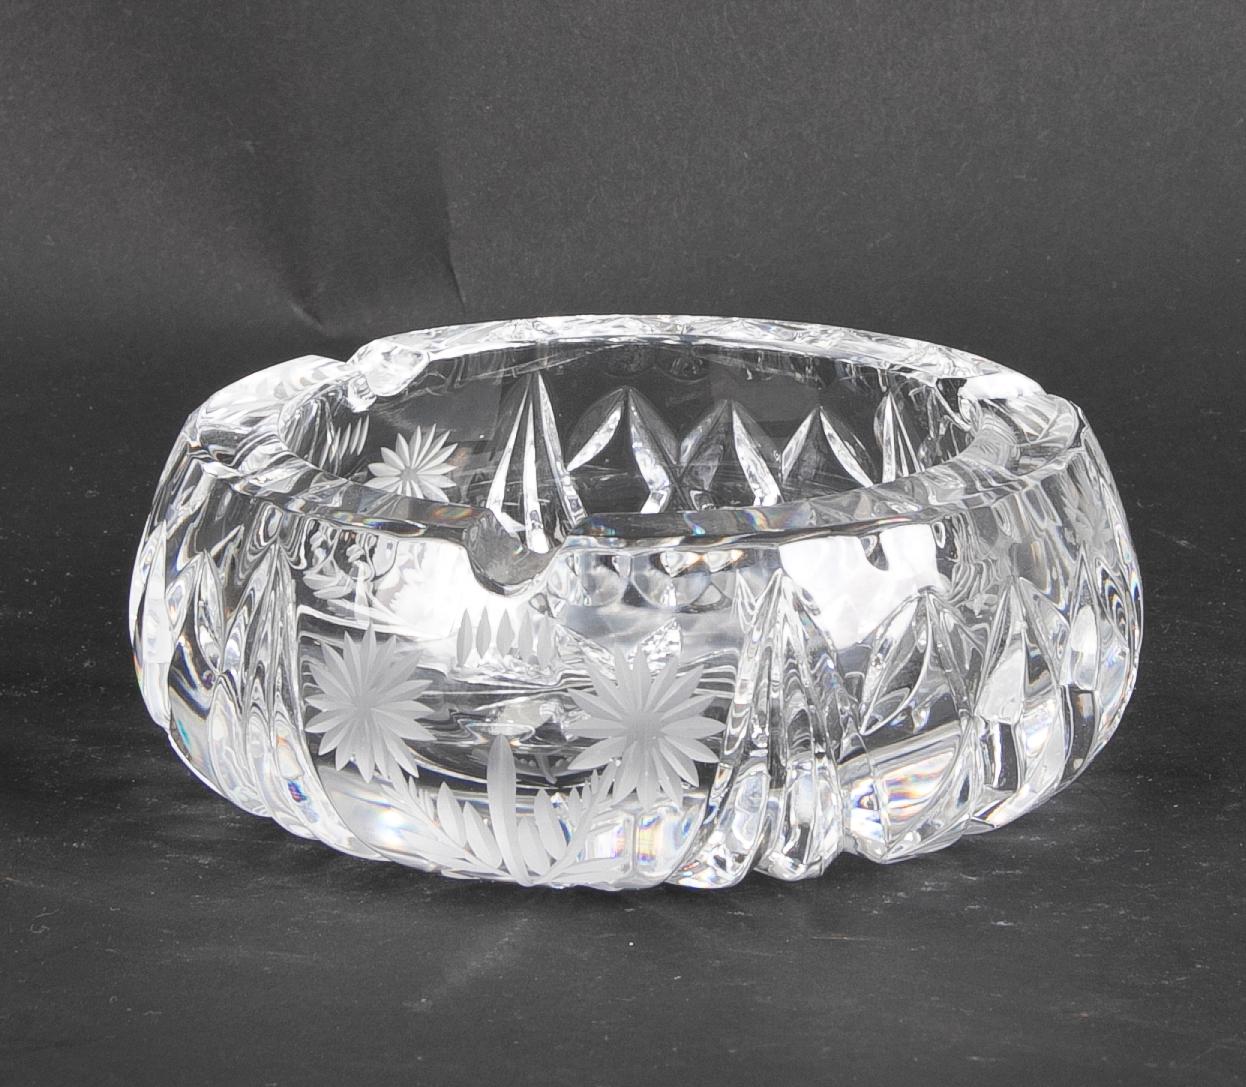 German Solid Ashtray Made of Hand-Carved Crystal For Sale